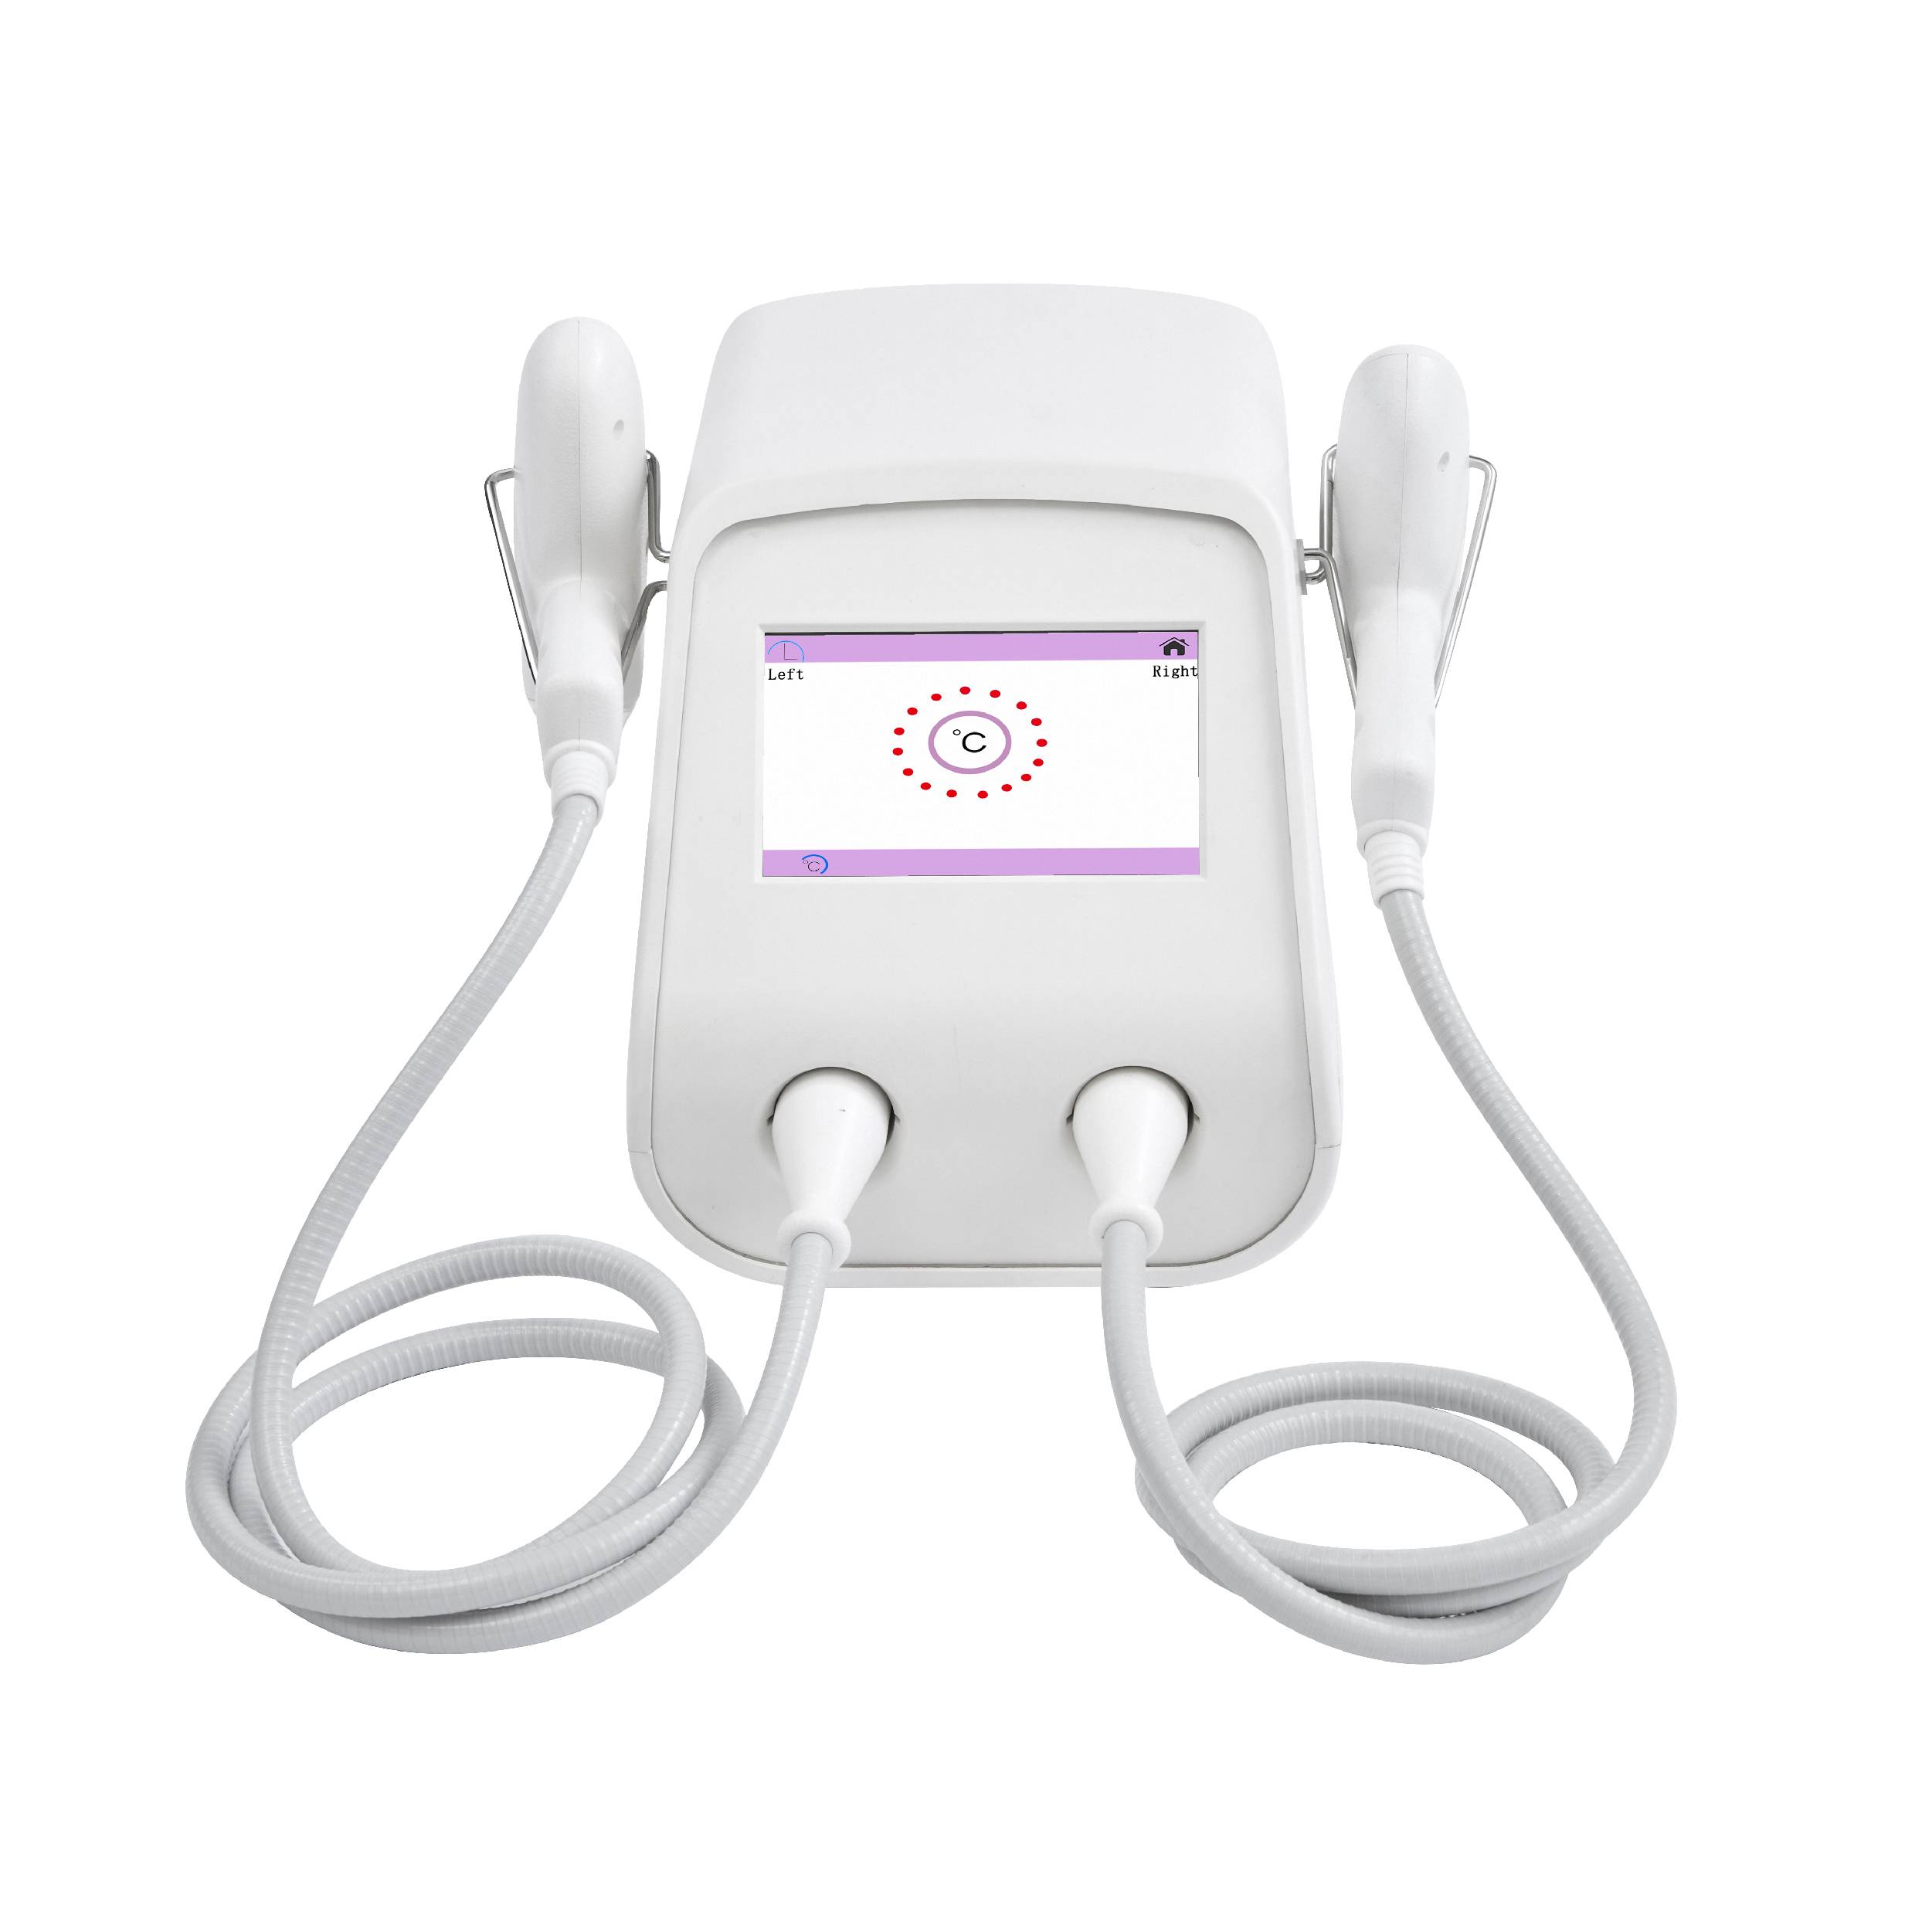 Double Handle Thermal Fractional Skin Rejuvenation Device